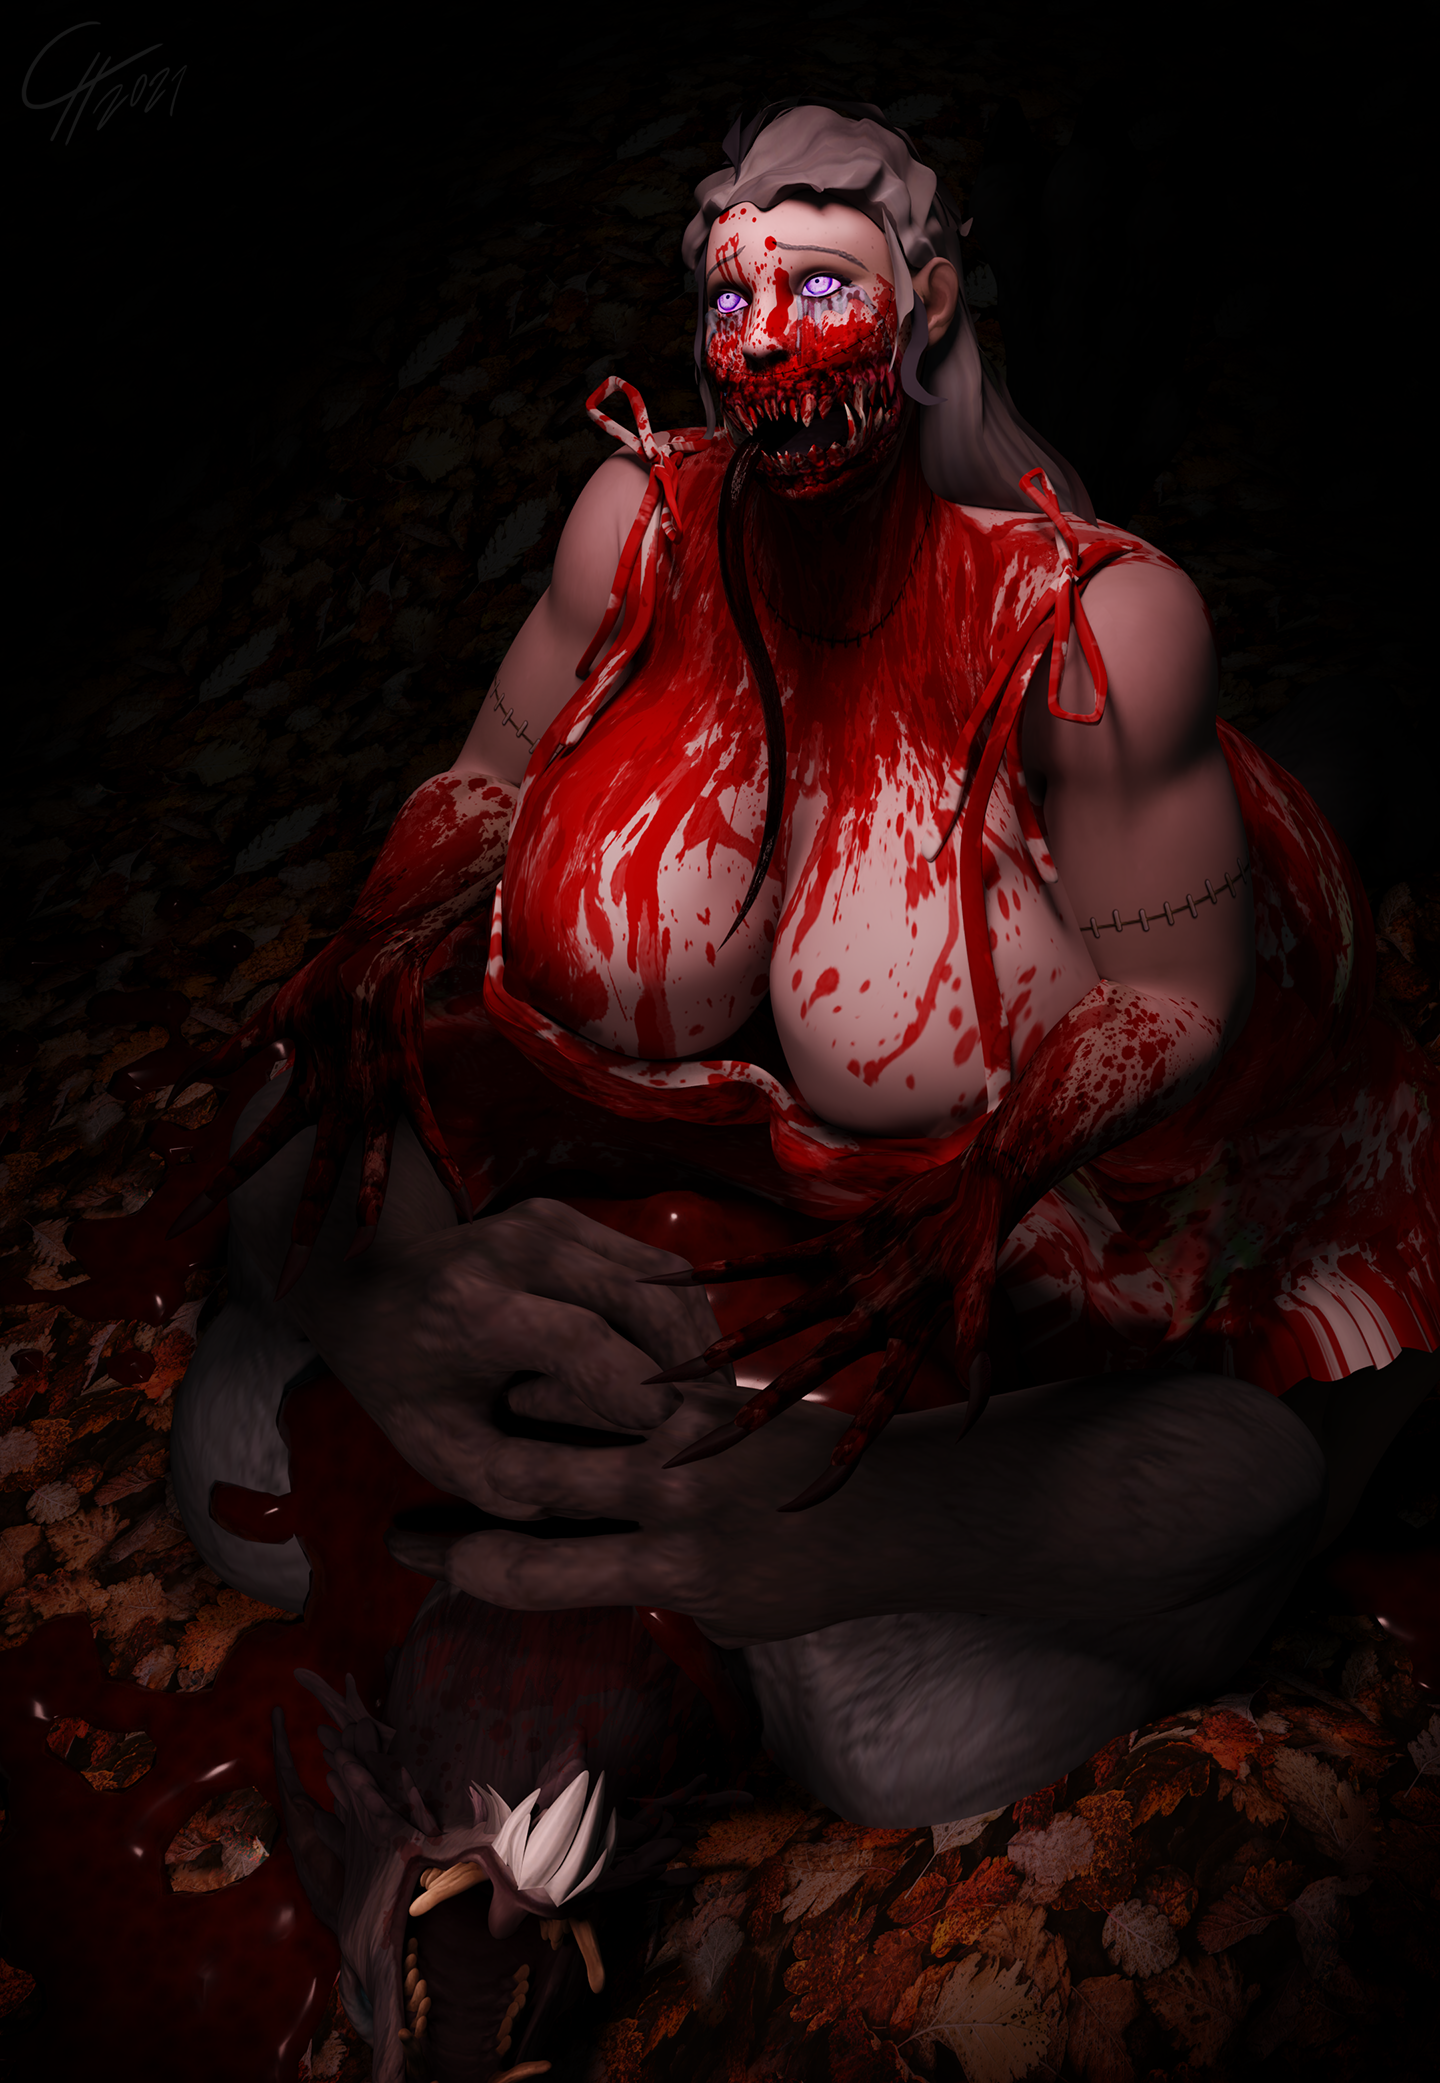 Lament of the Ravenous [Undead/BBW/Horror]
She thought she had her humanity back.
She thought she wouldn't hunger for it.
She thought she could control it.
She thought she had won.
She was wrong.
[b][url=http://bakaras.com/murlocish/albums/userpics/10001/18/SpookyMonthFinale2021XL.png]==XL-Size Edit==[/url]

[b][url=https://www.youtube.com/watch?v=VmIPNFK5mYU]===Inspiration from this song!====[/url][/b]
Keywords: OC;Human;Undead;BBW;Kul Tiran;Gore;Worgen;horror